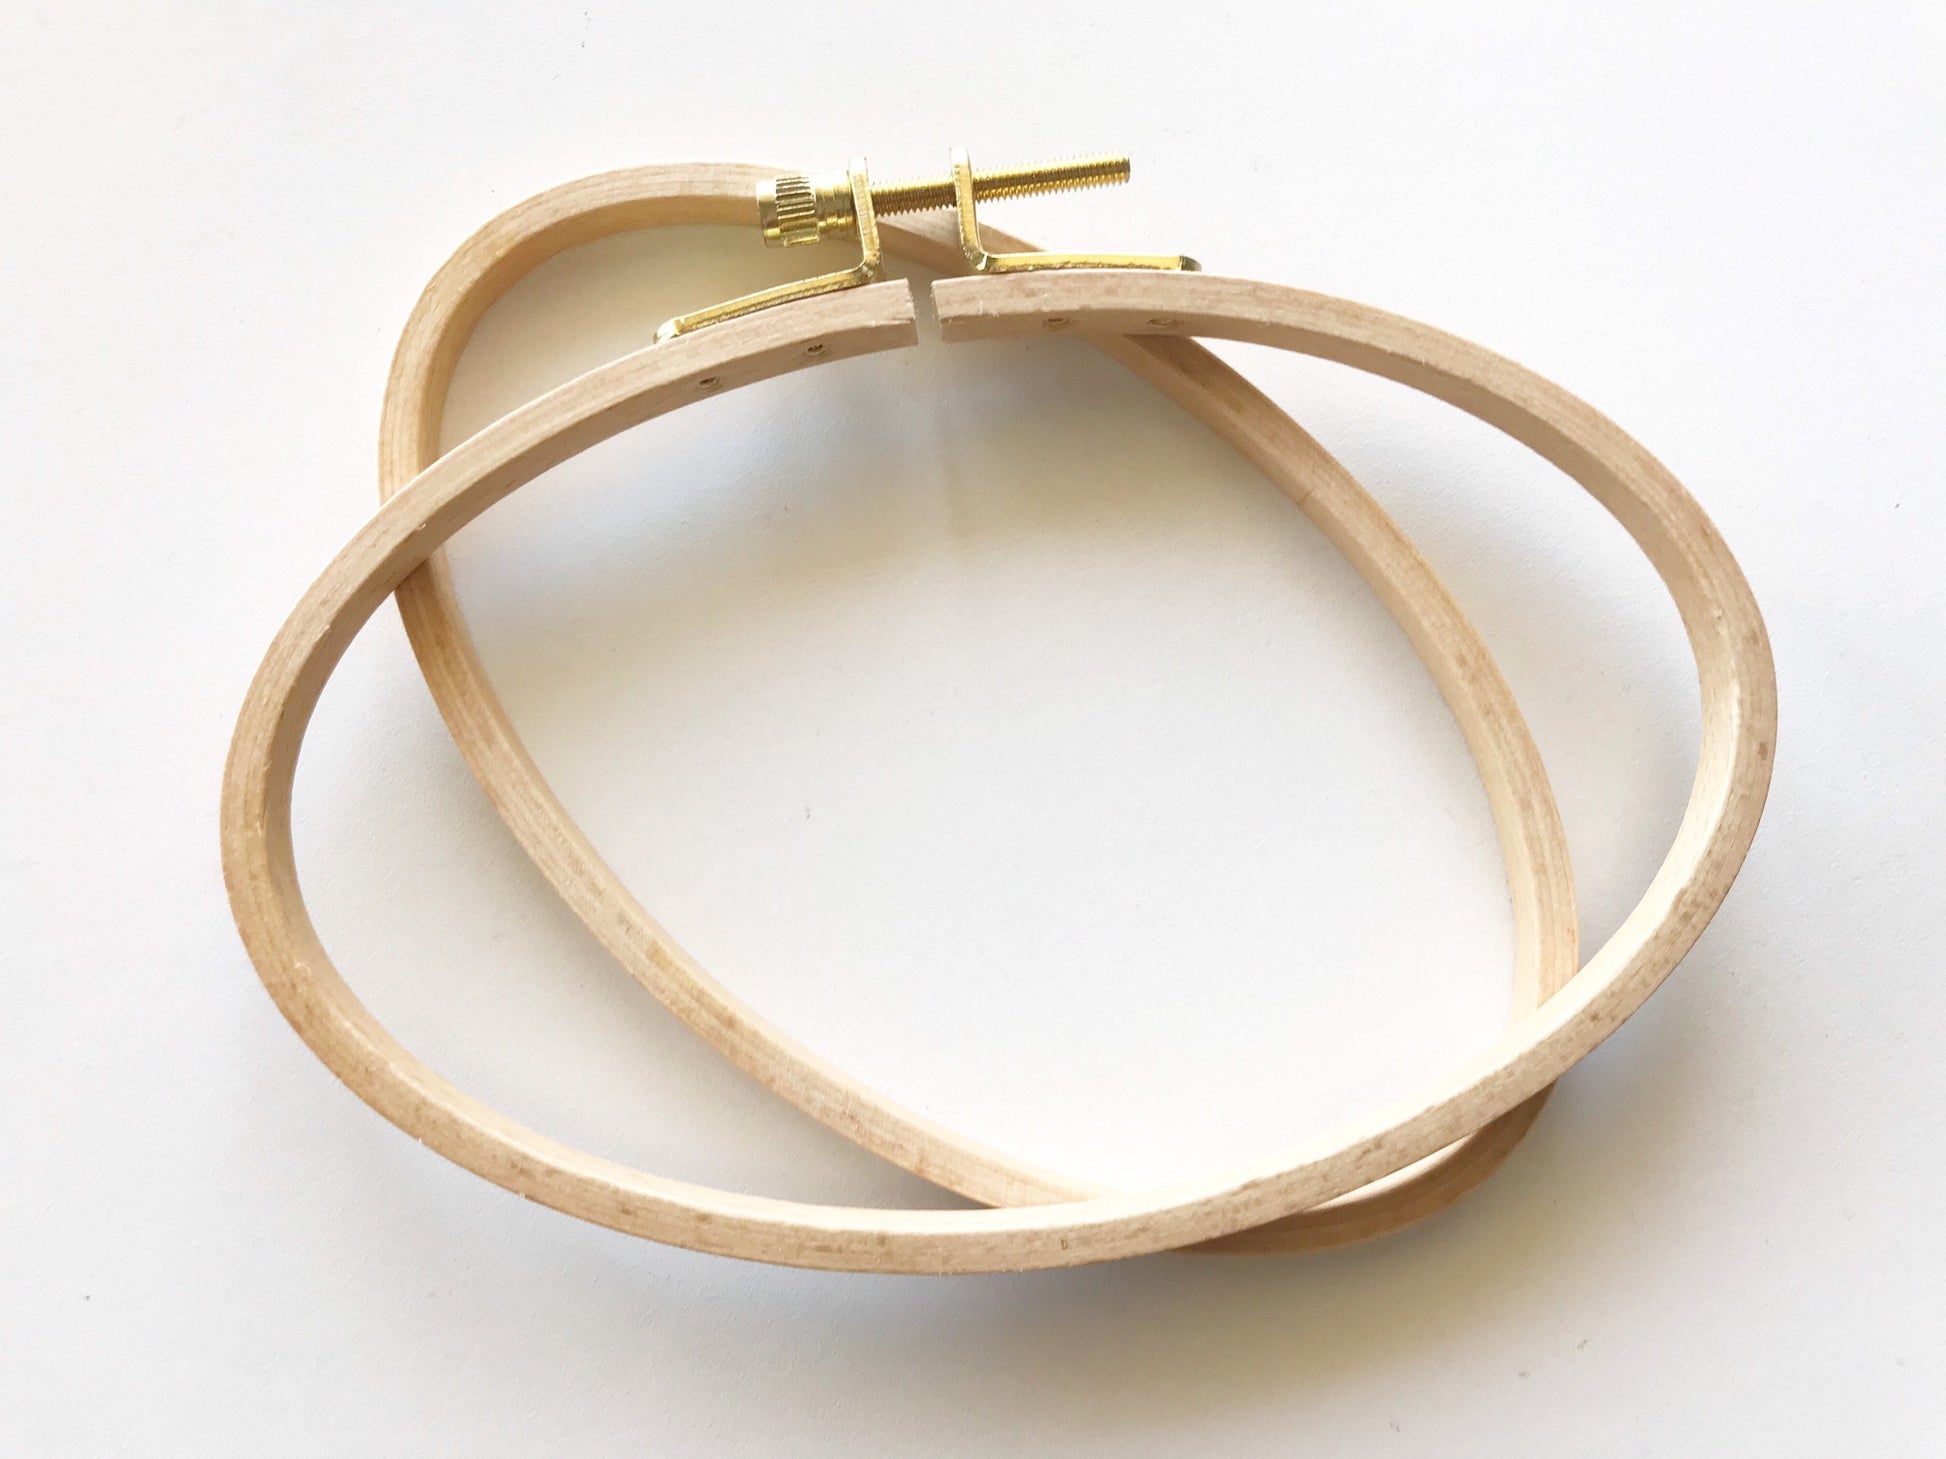 Beech Wood Embroidery Hoops - Choose your size